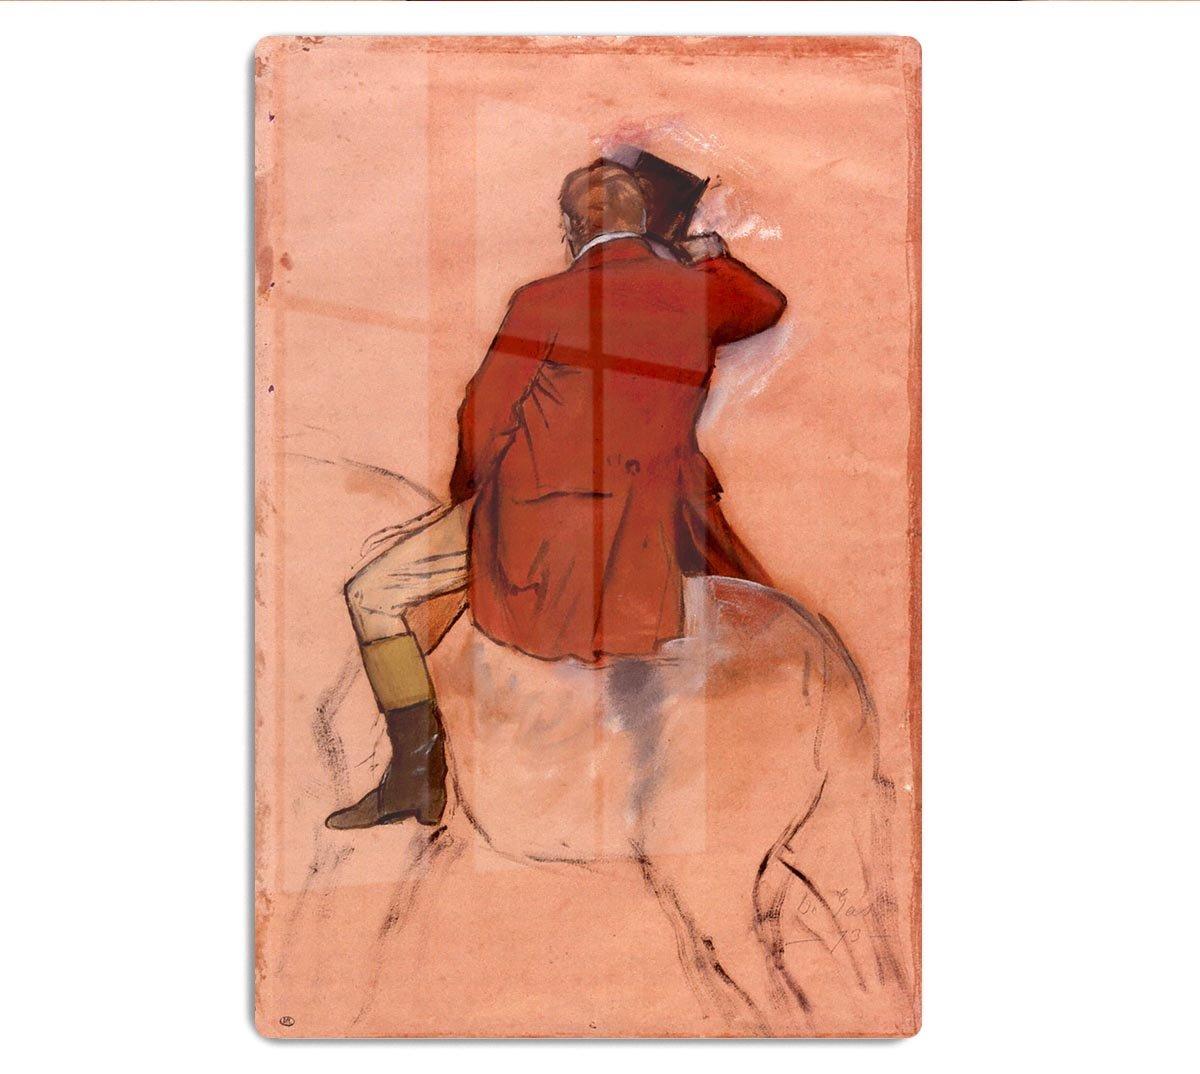 Rider with red jacket by Degas HD Metal Print - Canvas Art Rocks - 1